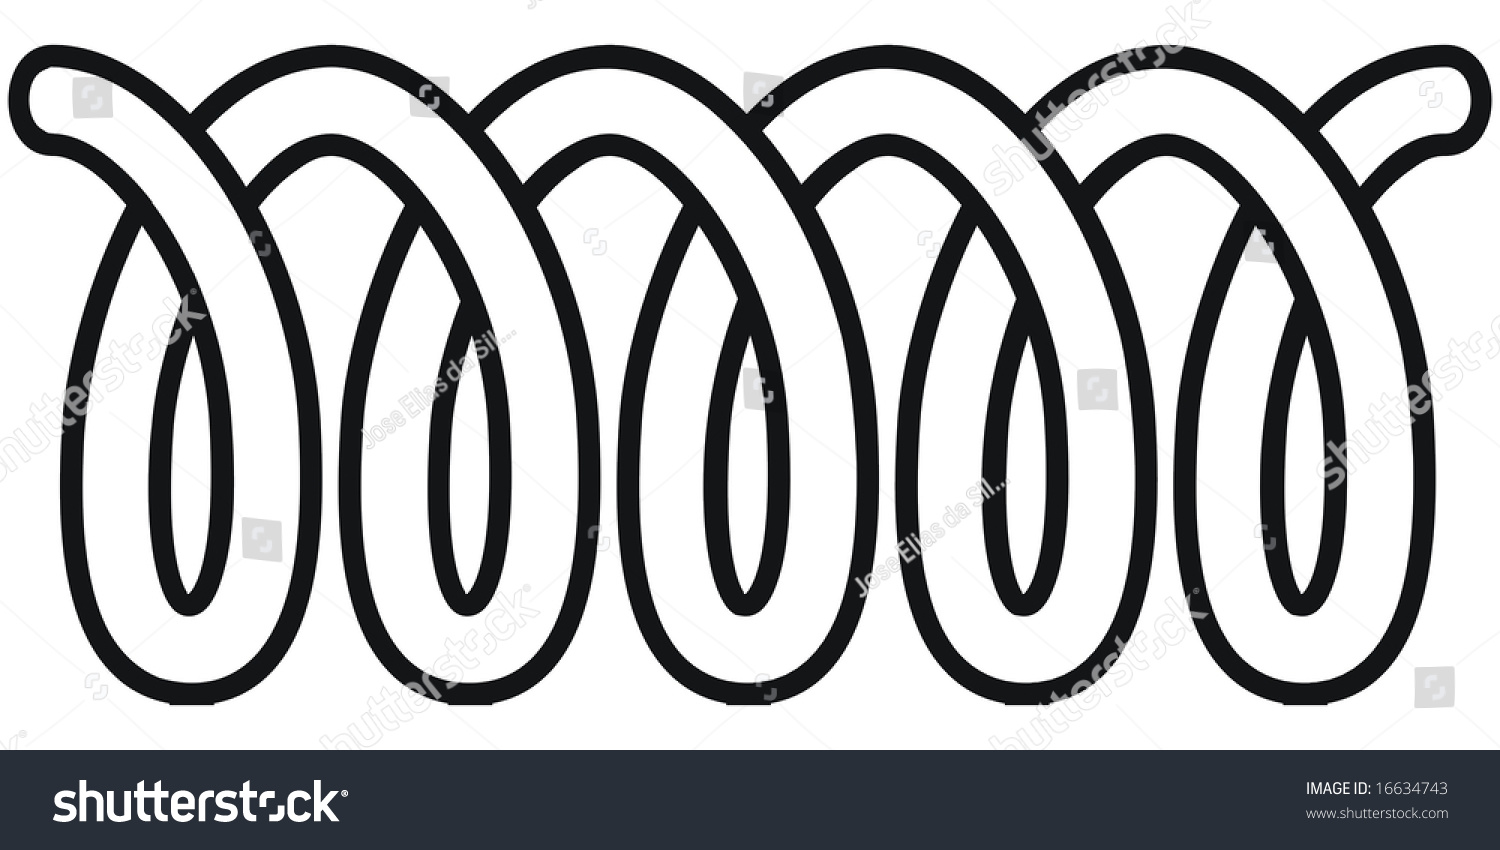 free clipart coil spring - photo #44